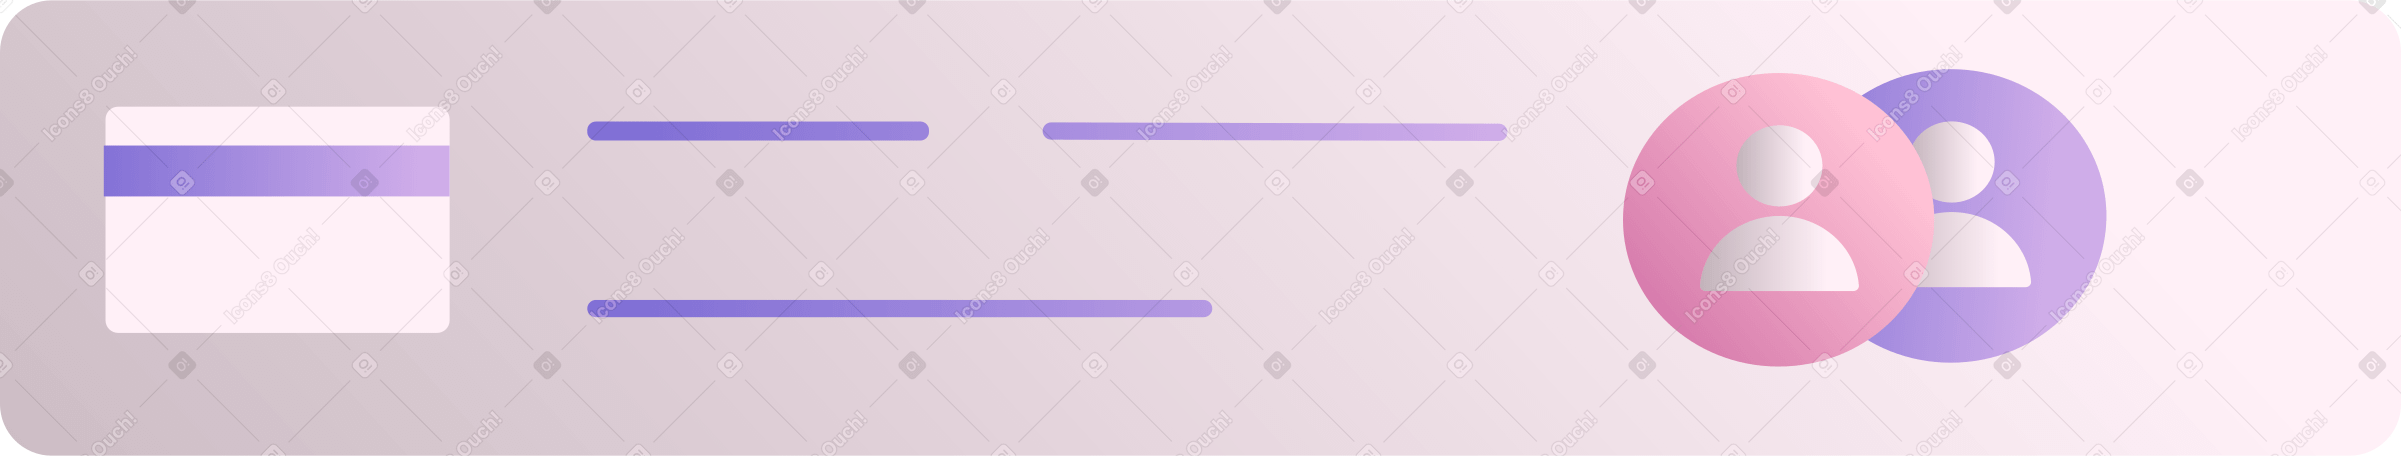 payment window Illustration in PNG, SVG